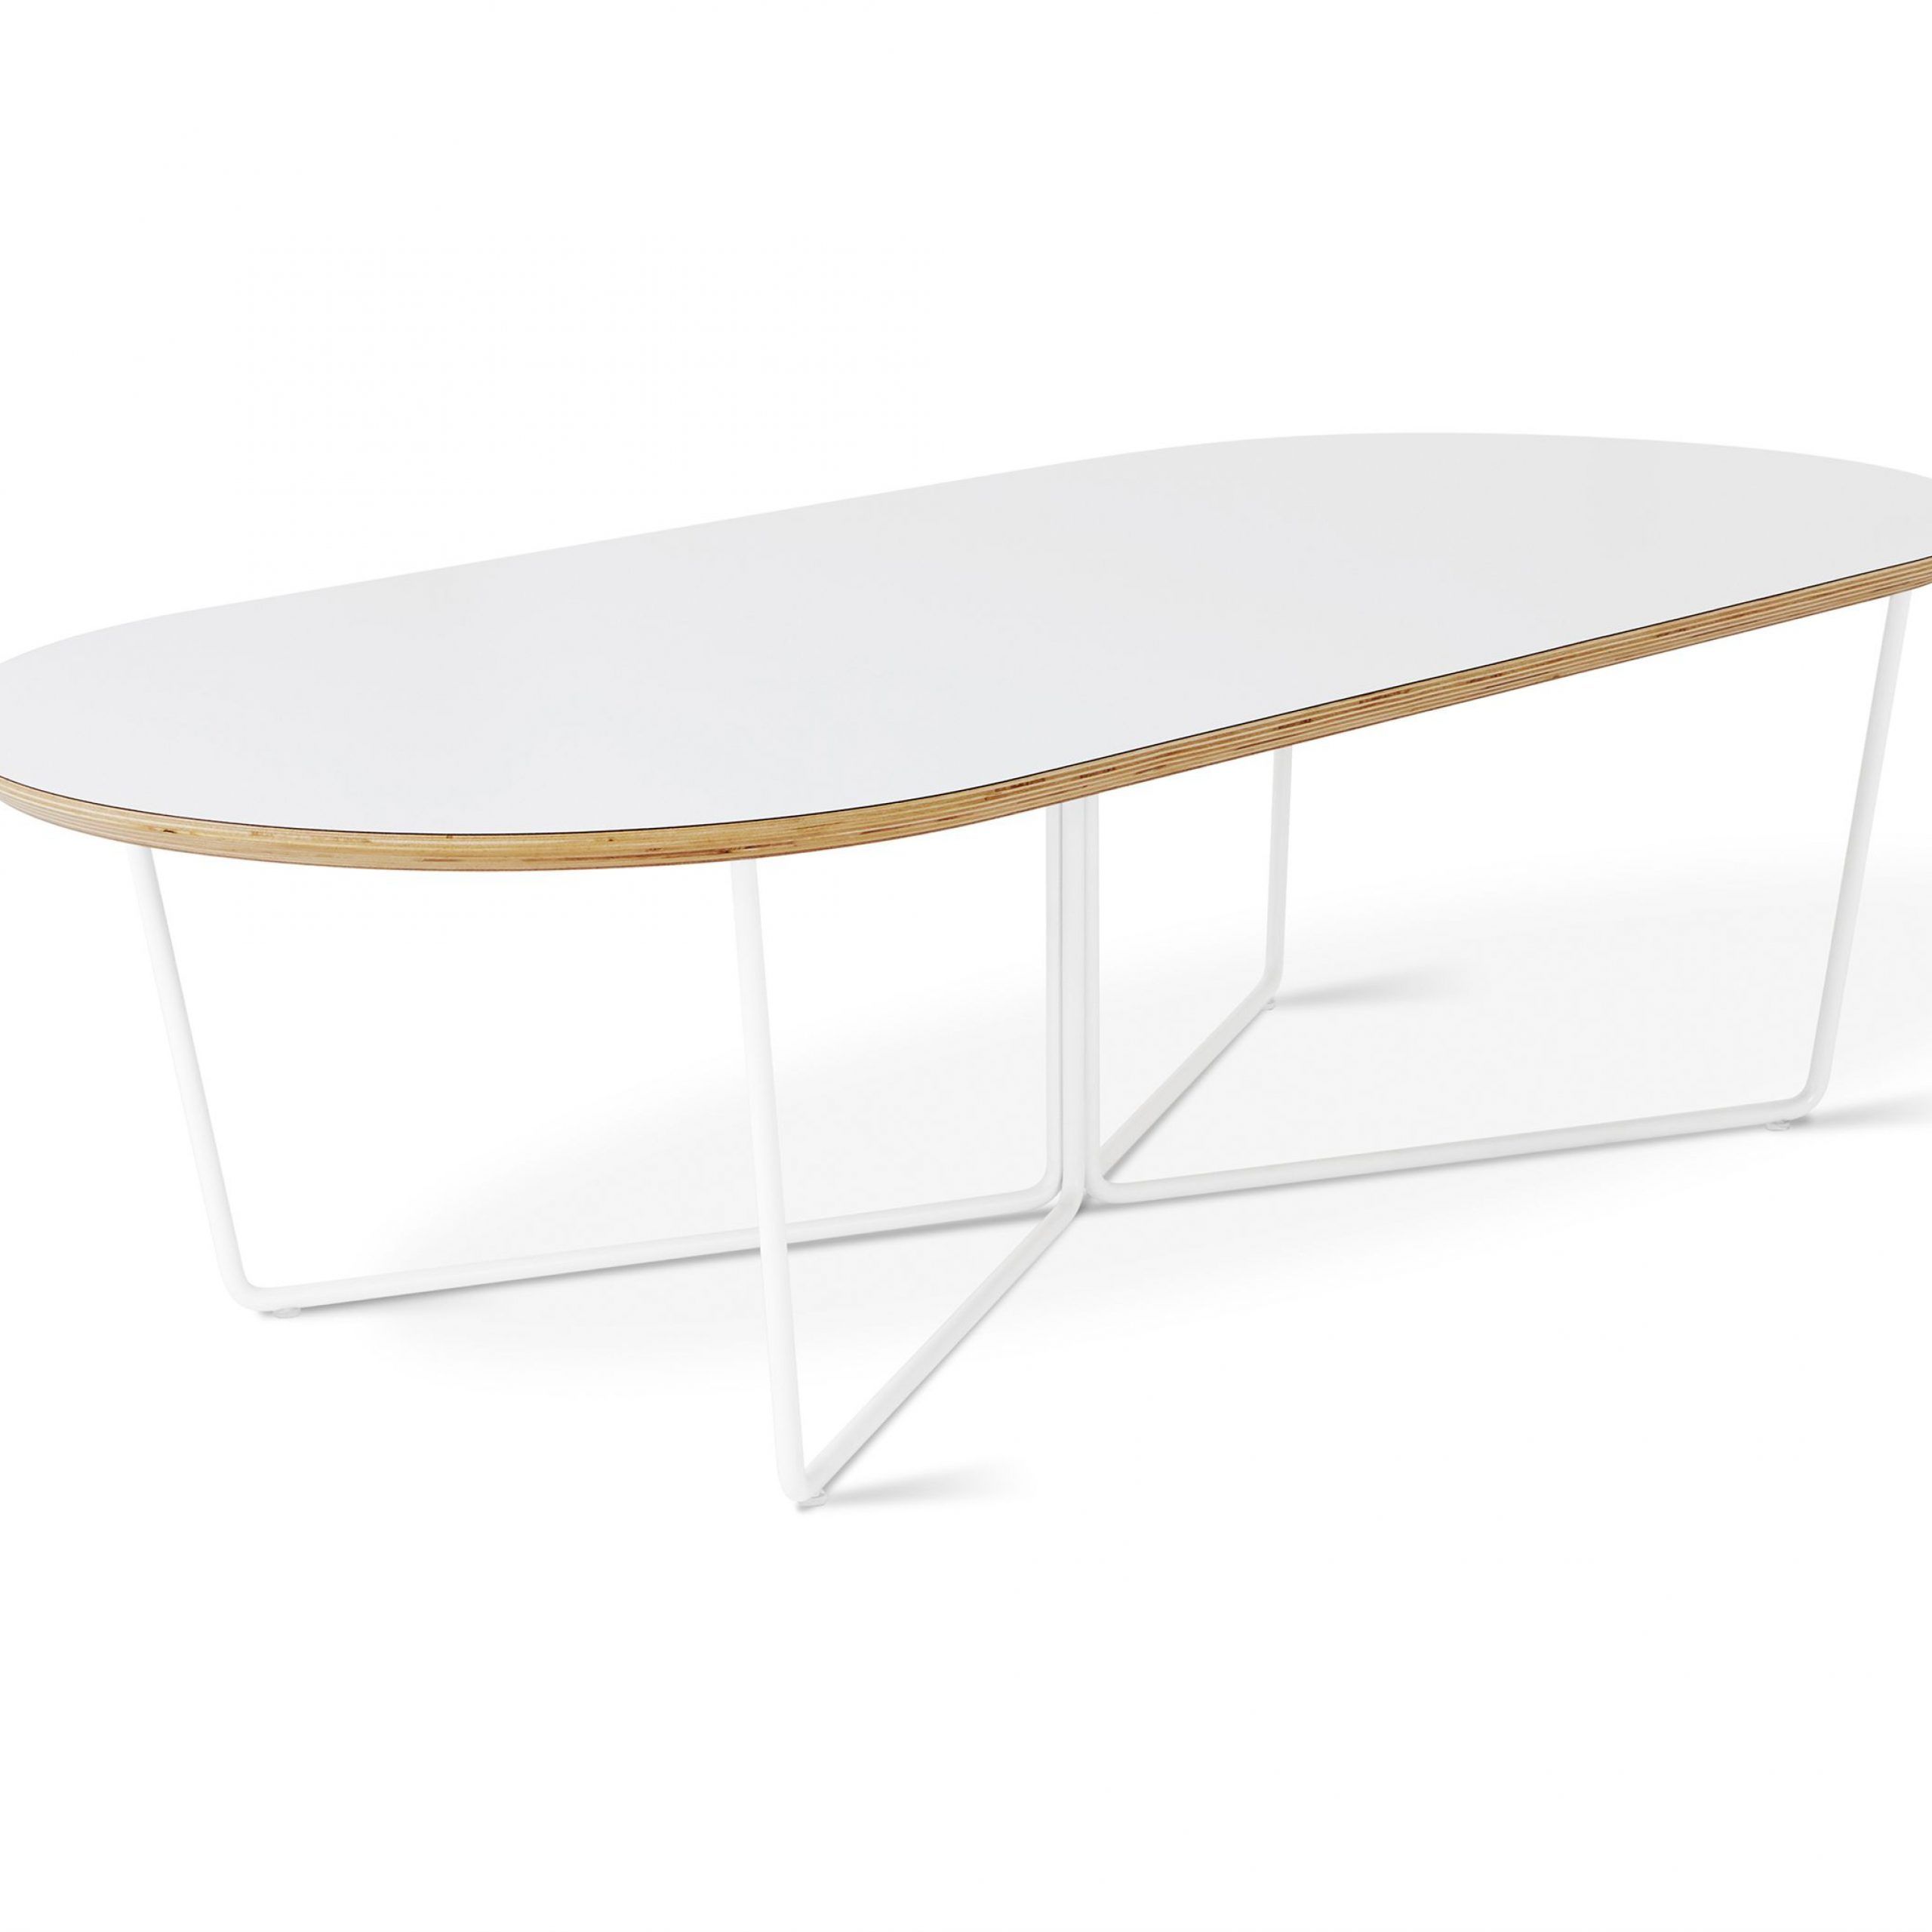 Array Coffee Table – Oval – White | The Array Coffee Table With White Geometric Coffee Tables (View 12 of 15)